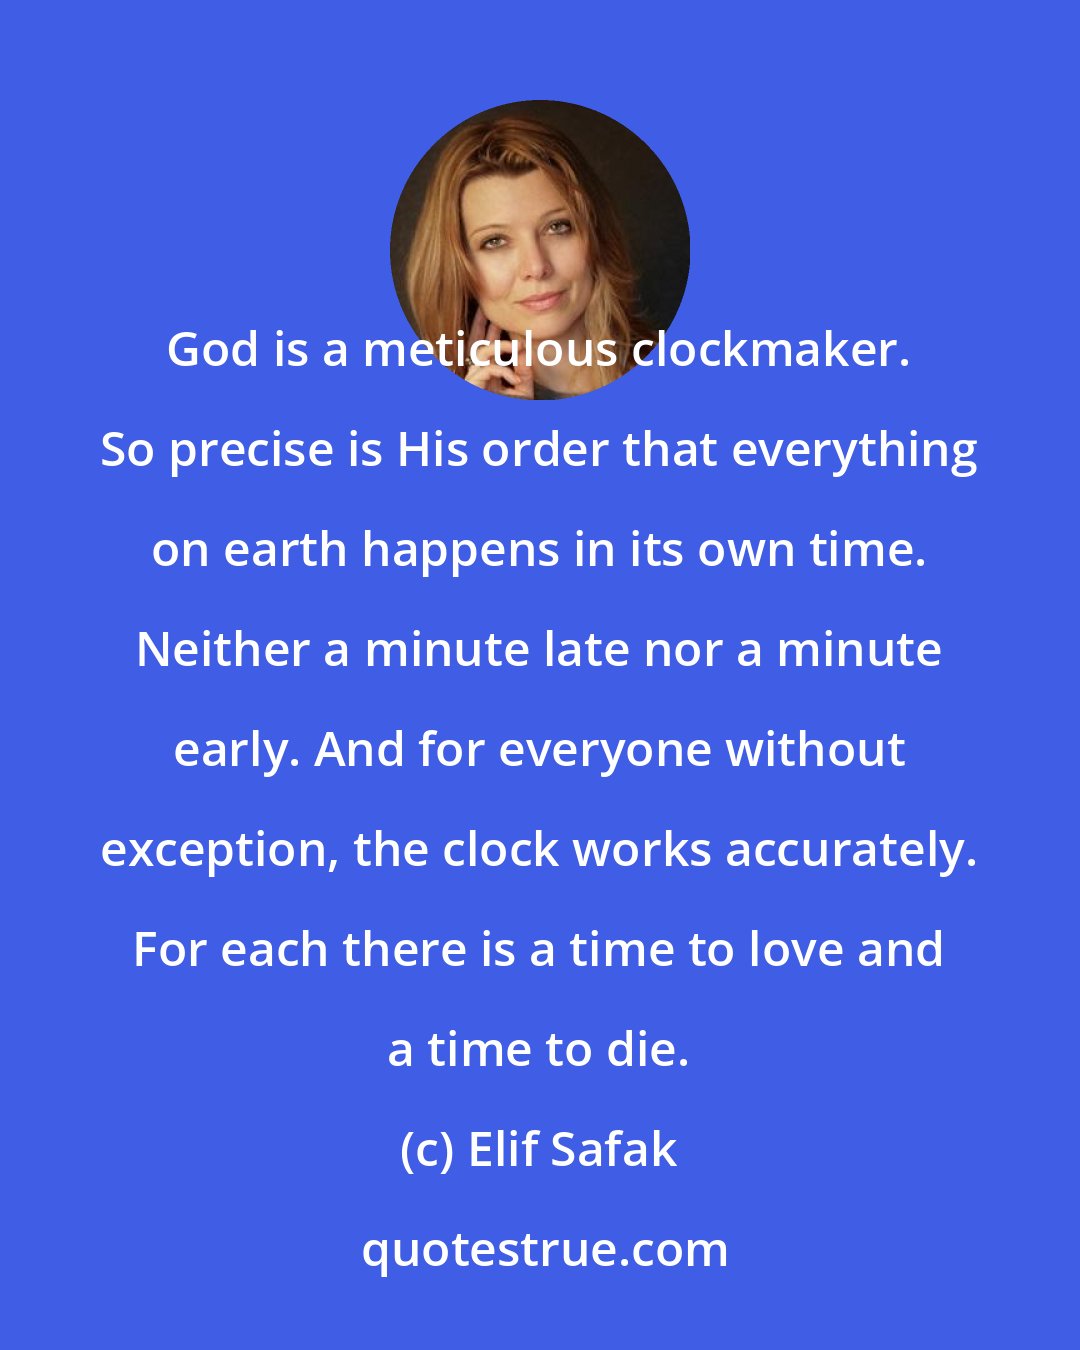 Elif Safak: God is a meticulous clockmaker. So precise is His order that everything on earth happens in its own time. Neither a minute late nor a minute early. And for everyone without exception, the clock works accurately. For each there is a time to love and a time to die.